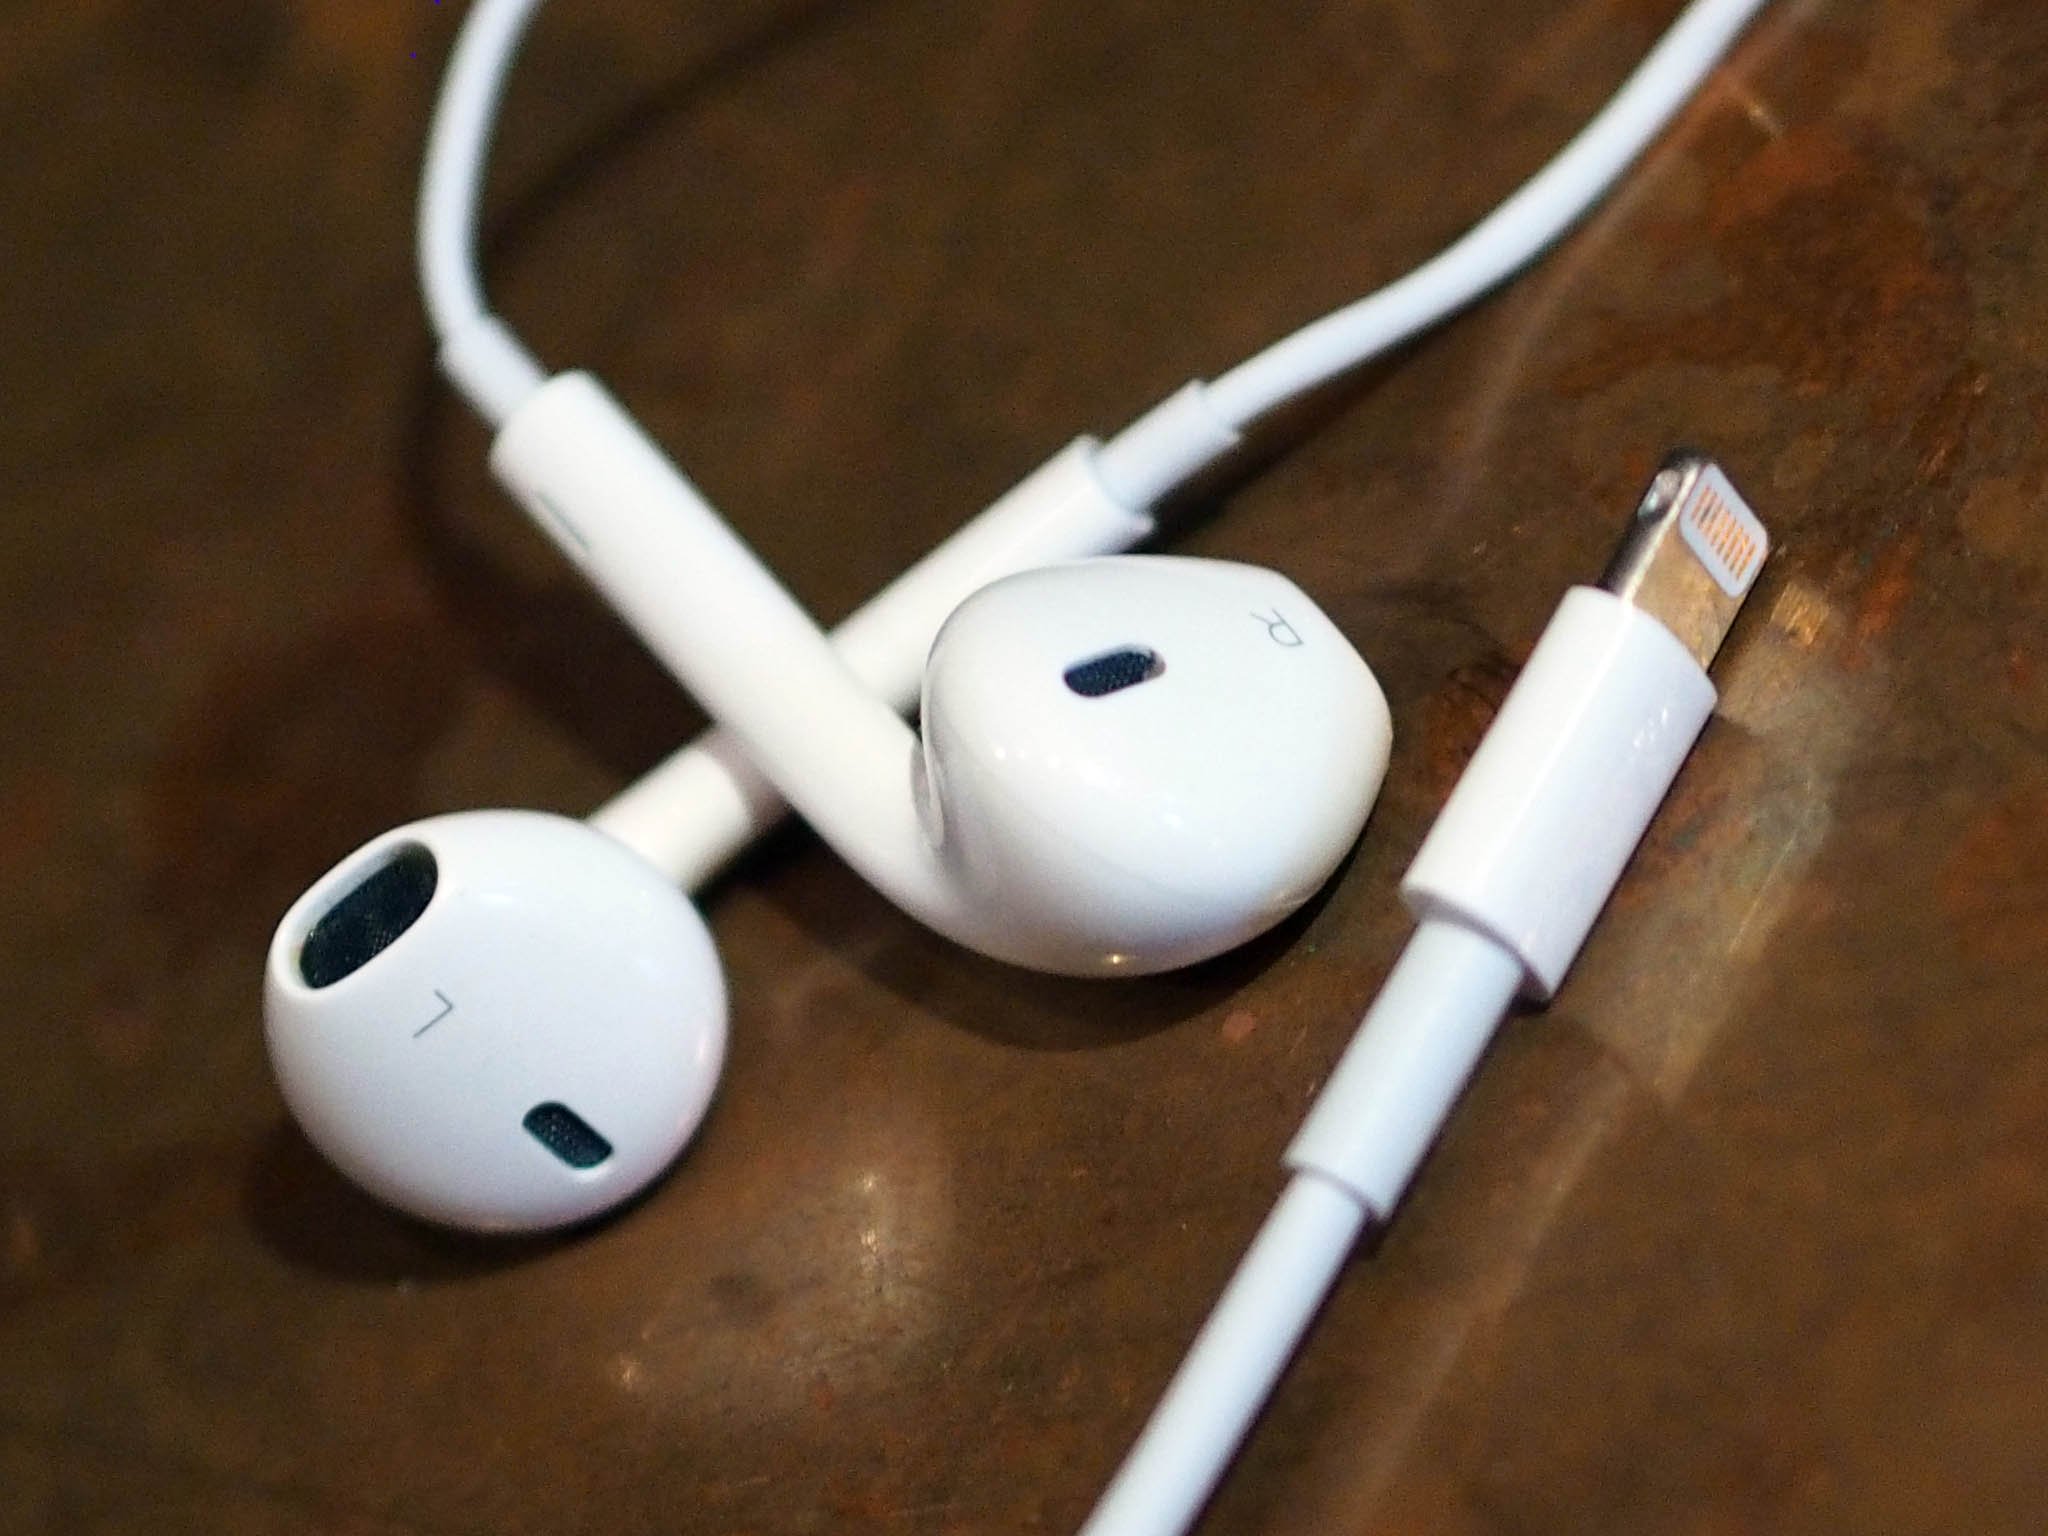 Apple's EarPods with a lightning connector